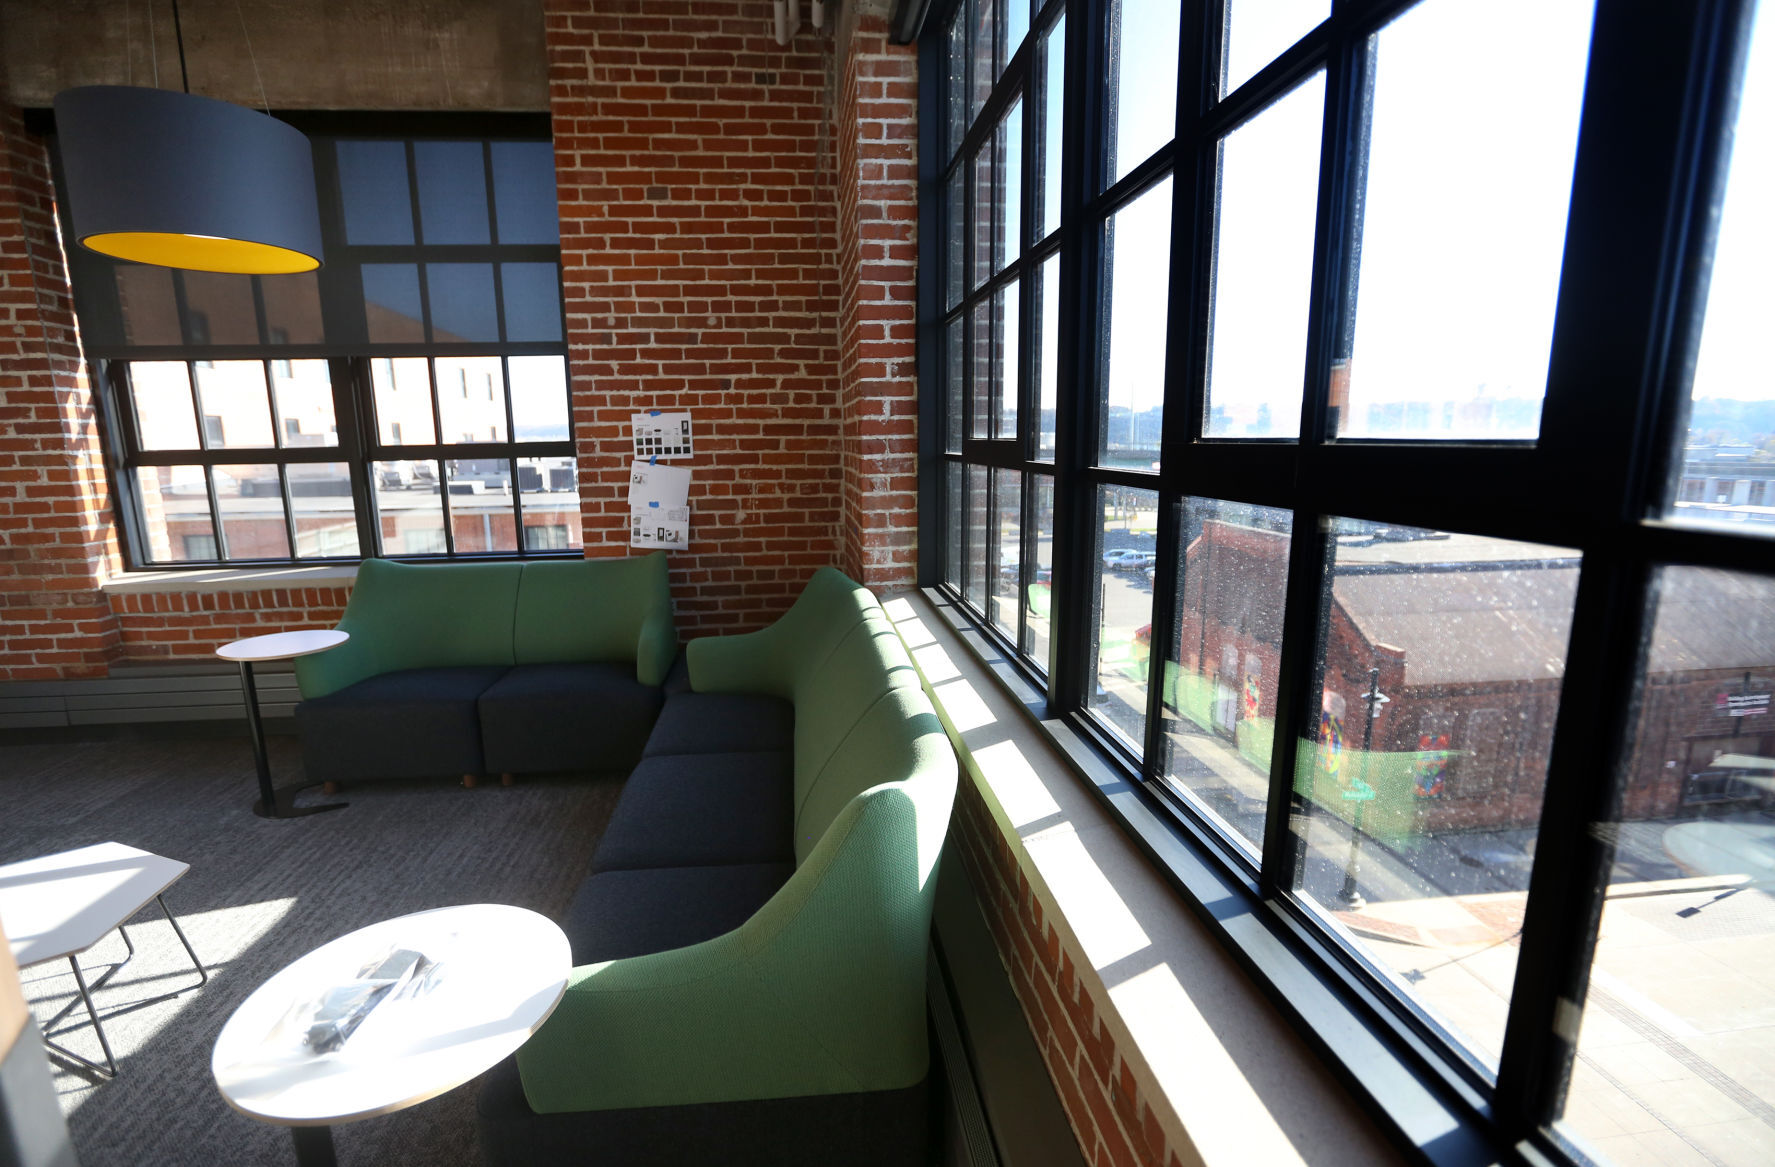 A lounge area at the Dupaco Voices Building in Dubuque on Wednesday, Nov. 4, 2020. PHOTO CREDIT: JESSICA REILLY